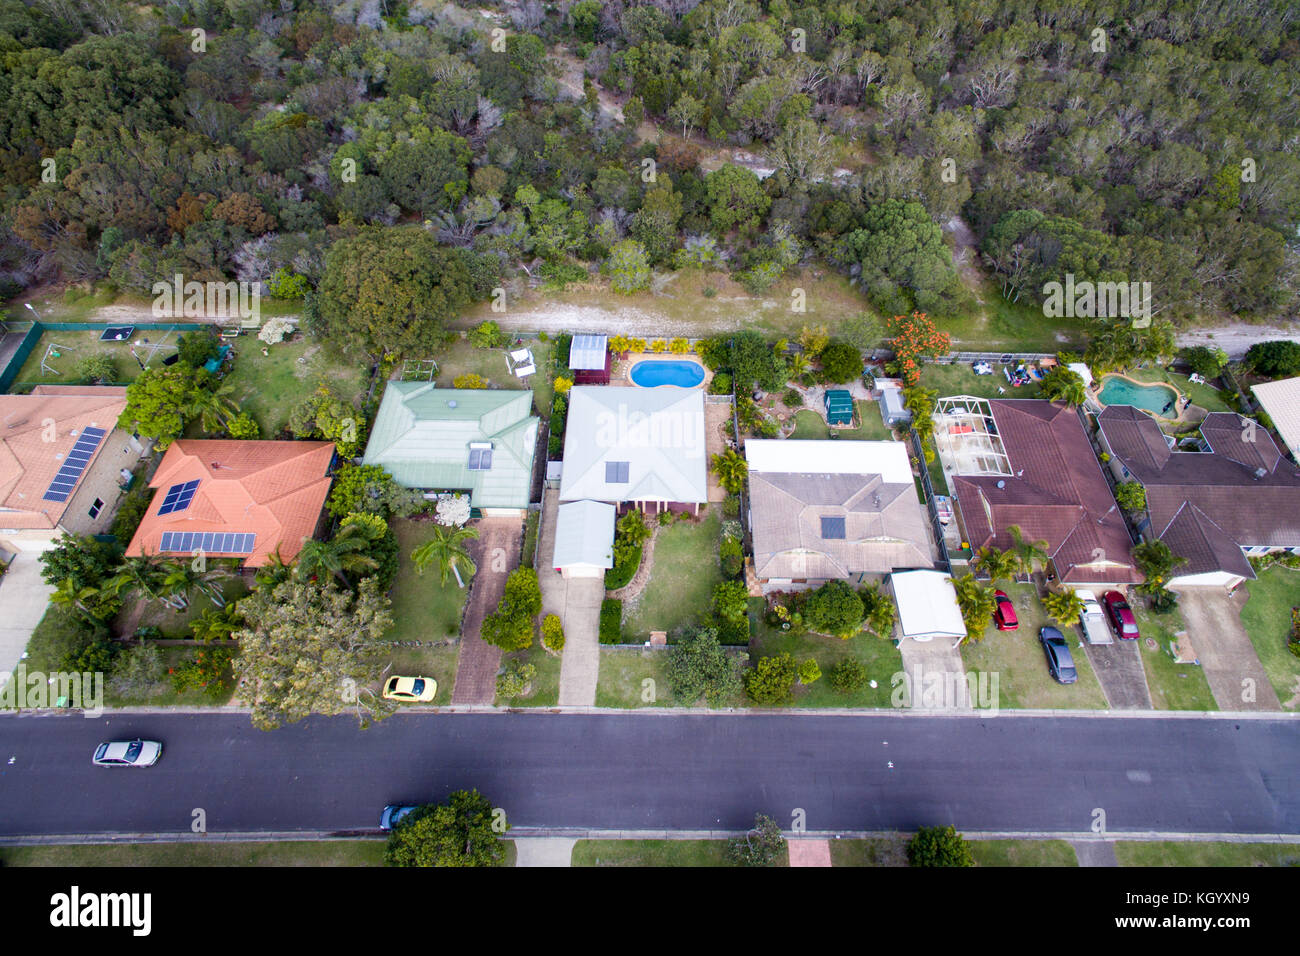 Aerial view of a residential neighbourhood in Bogangar, New South Wales, Australia. Stock Photo